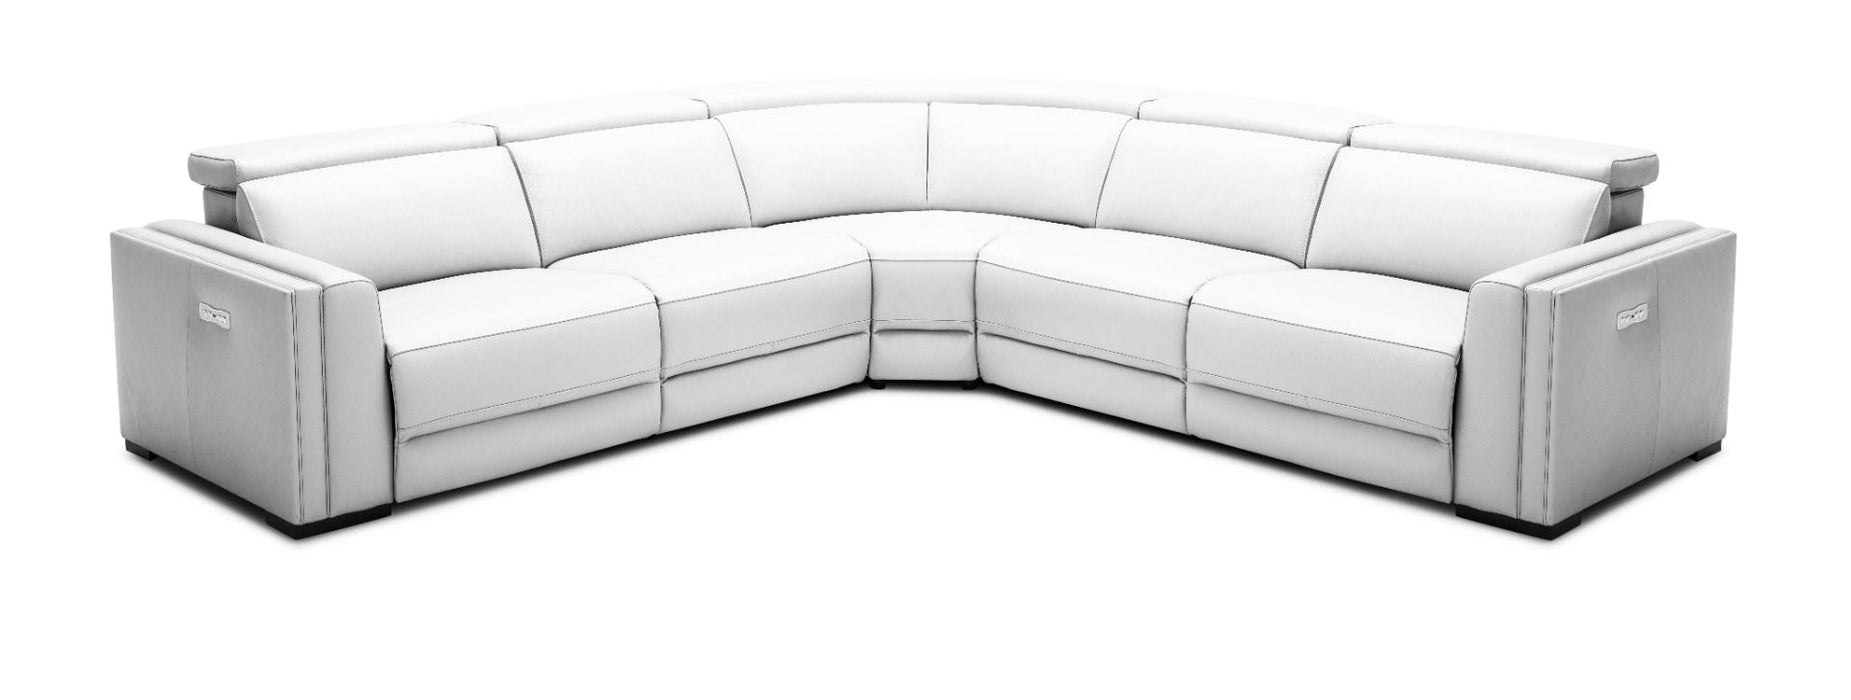 VIG Furniture - Modrest Frazier Modern White Leather Sectional Sofa with Recliners - VGKM-KM268H-W-SECT